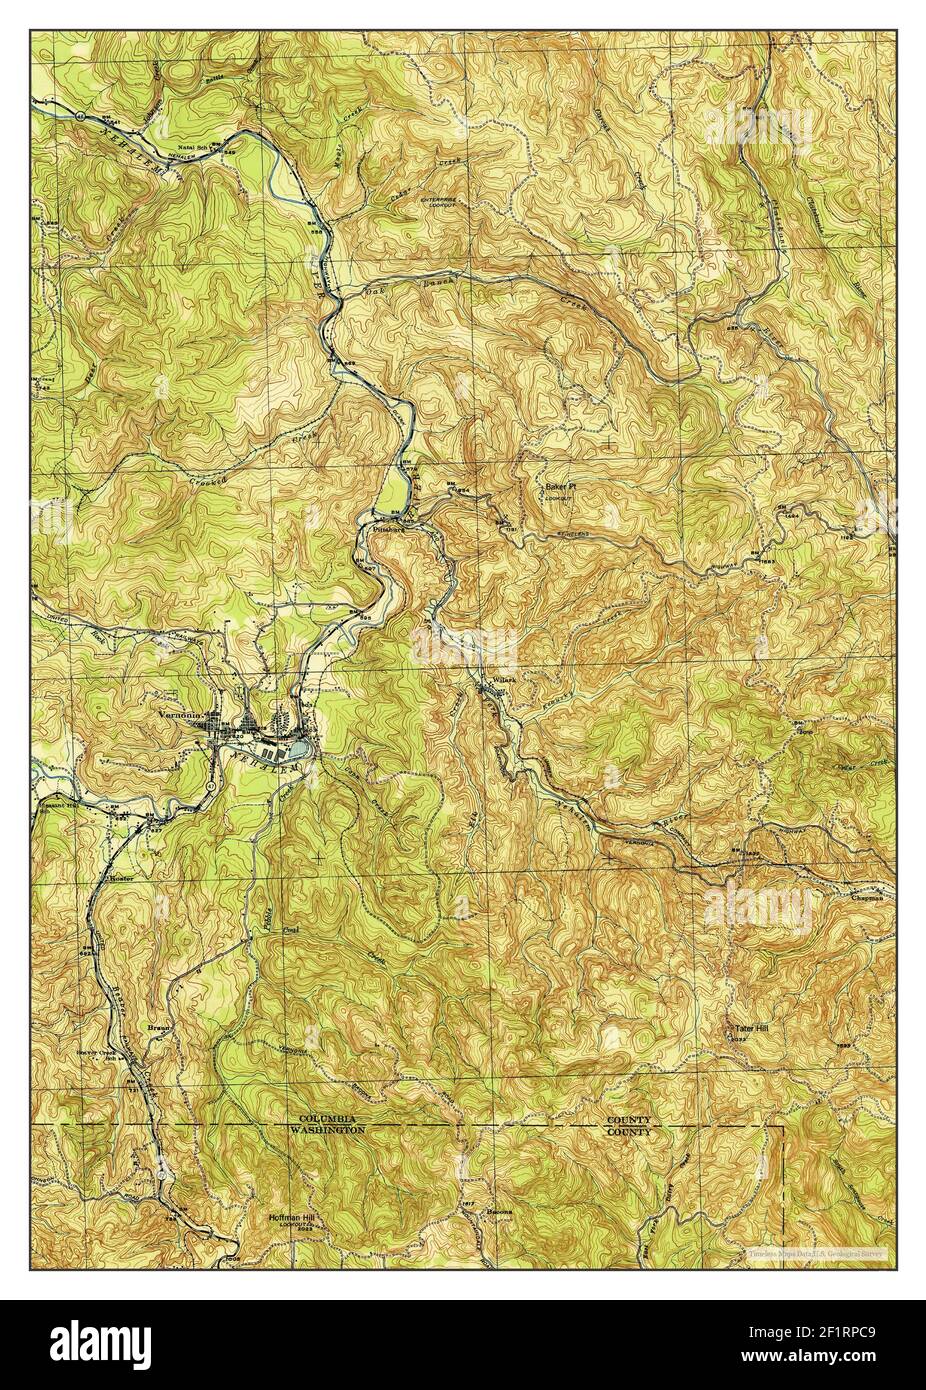 Vernonia, Oregon, map 1943, 1:62500, United States of America by Timeless Maps, data U.S. Geological Survey Stock Photo